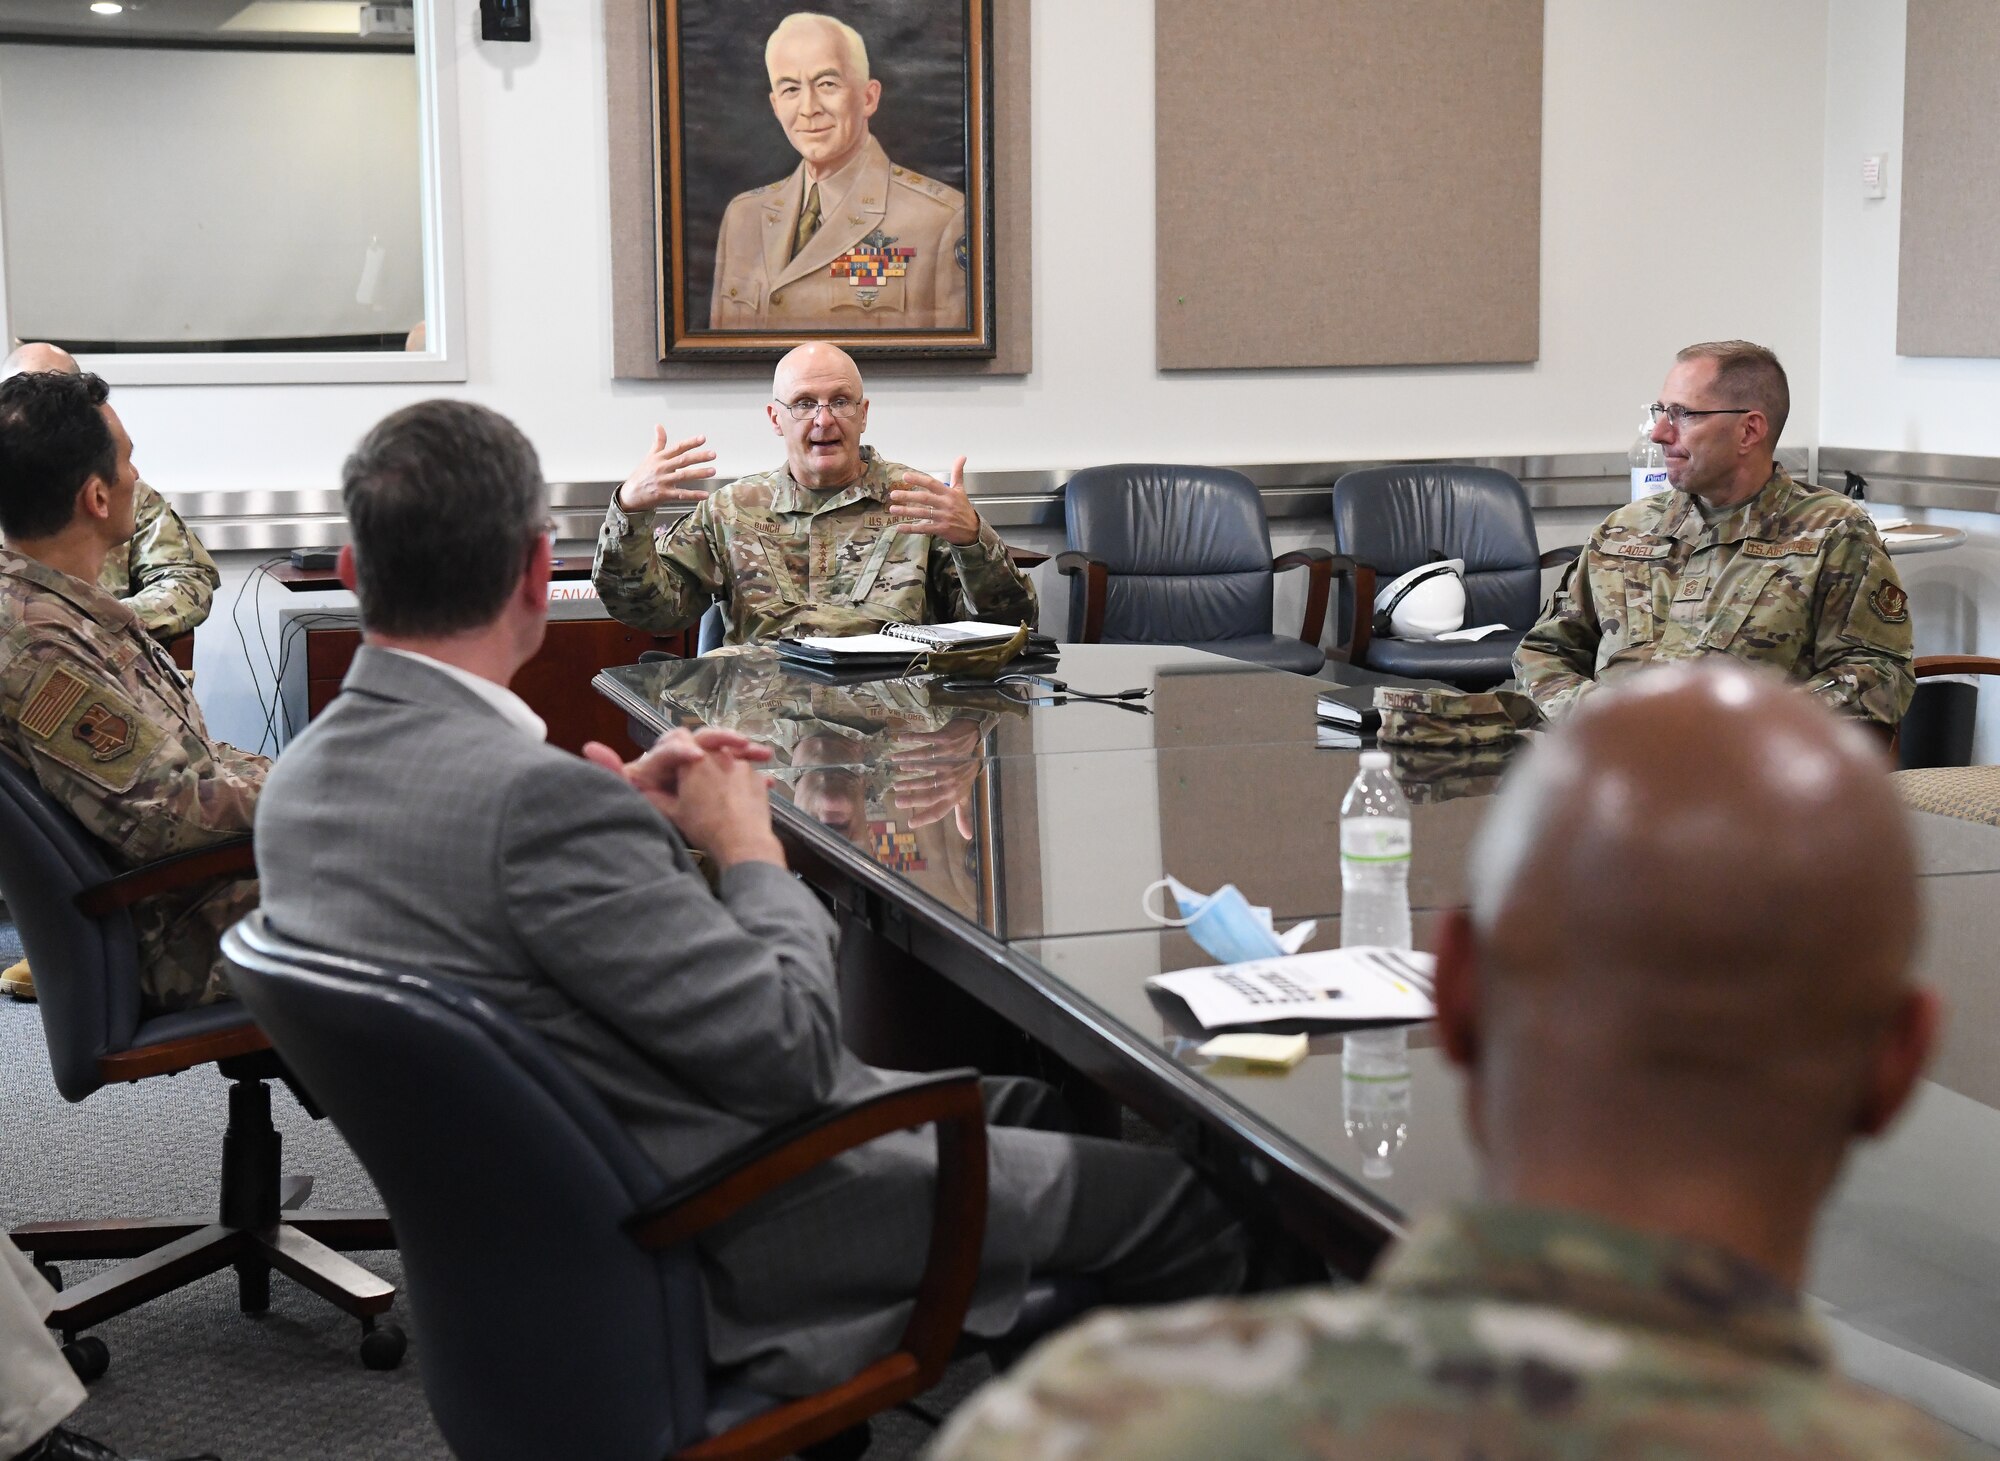 Gen. Arnold W. Bunch Jr., center, commander, Air Force Materiel Command, initiates a discussion about diversity and inclusion with Arnold Engineering Development Complex (AEDC) senior leadership, July 8, 2020, at Arnold Air Force Base, Tenn., headquarters of AEDC. Also pictured, Chief Master Sgt. Stanley Cadell, right, command chief, Air Force Materiel Command. Bunch and Cadell also held a diversity and inclusion discussion session with members of Team AEDC, including uniformed Airmen, DOD civilians and contractors. (U.S. Air Force photo by Jill Pickett)